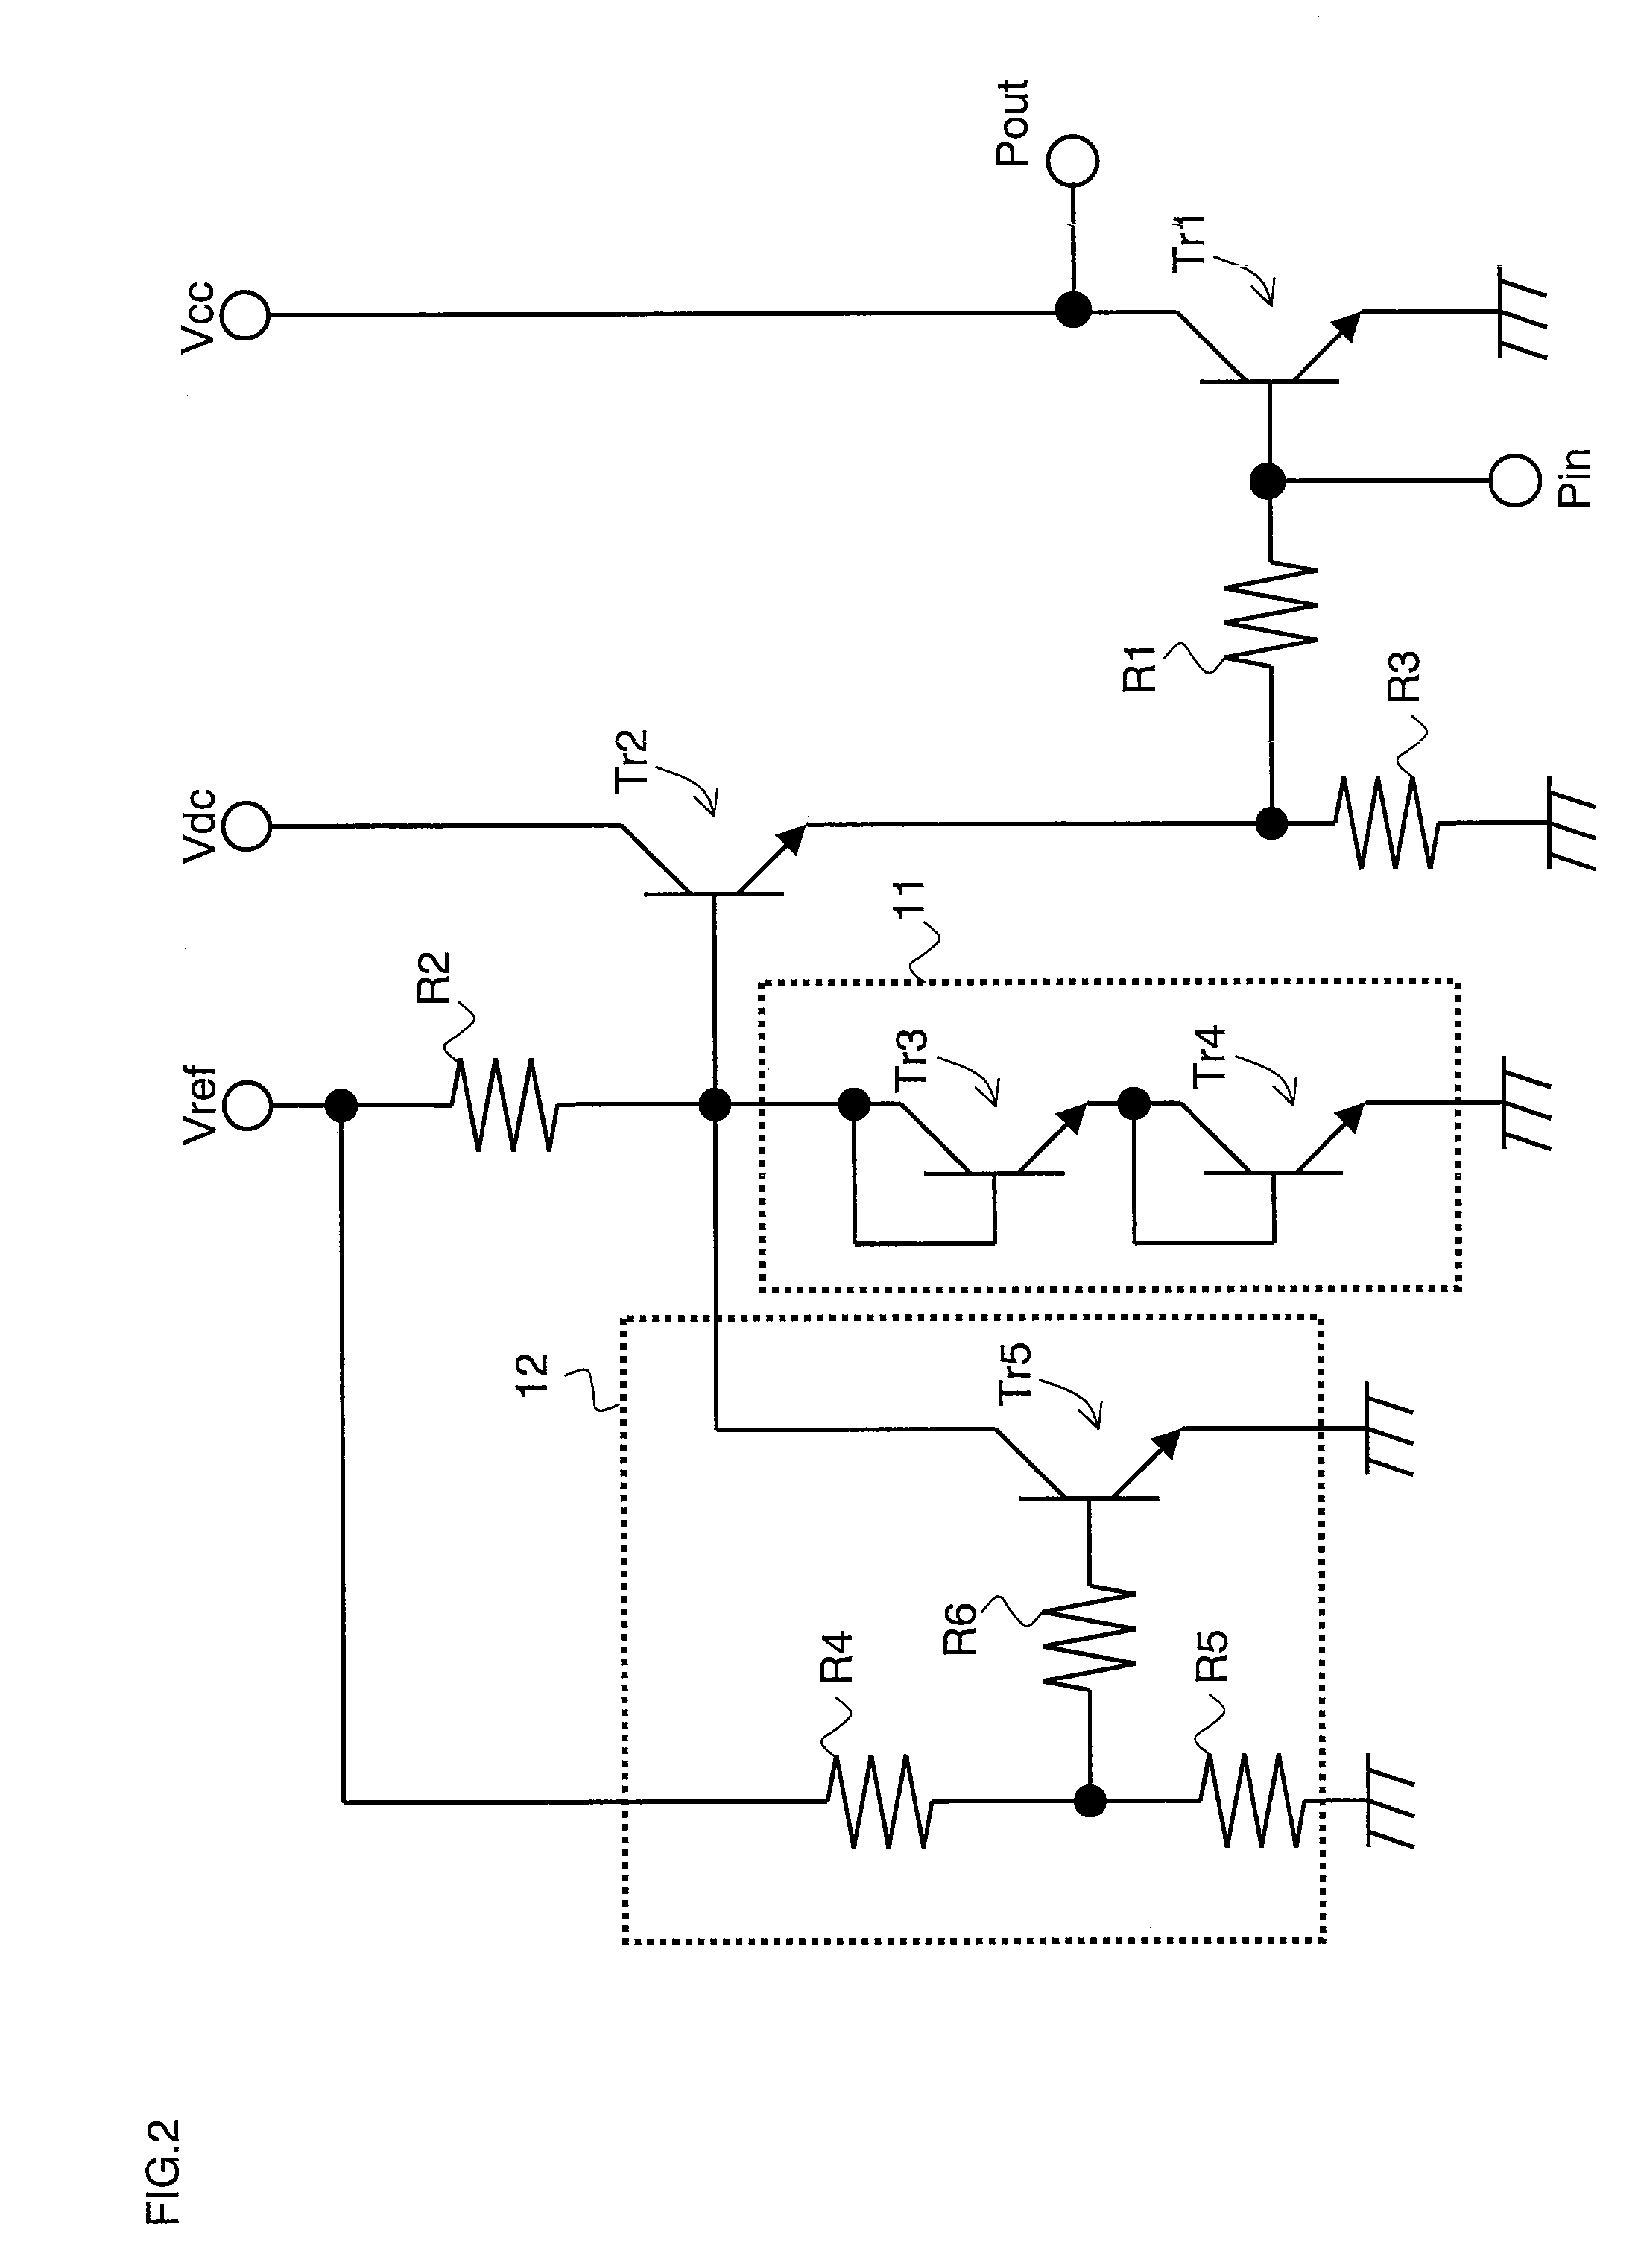 Radio-frequency power amplifier